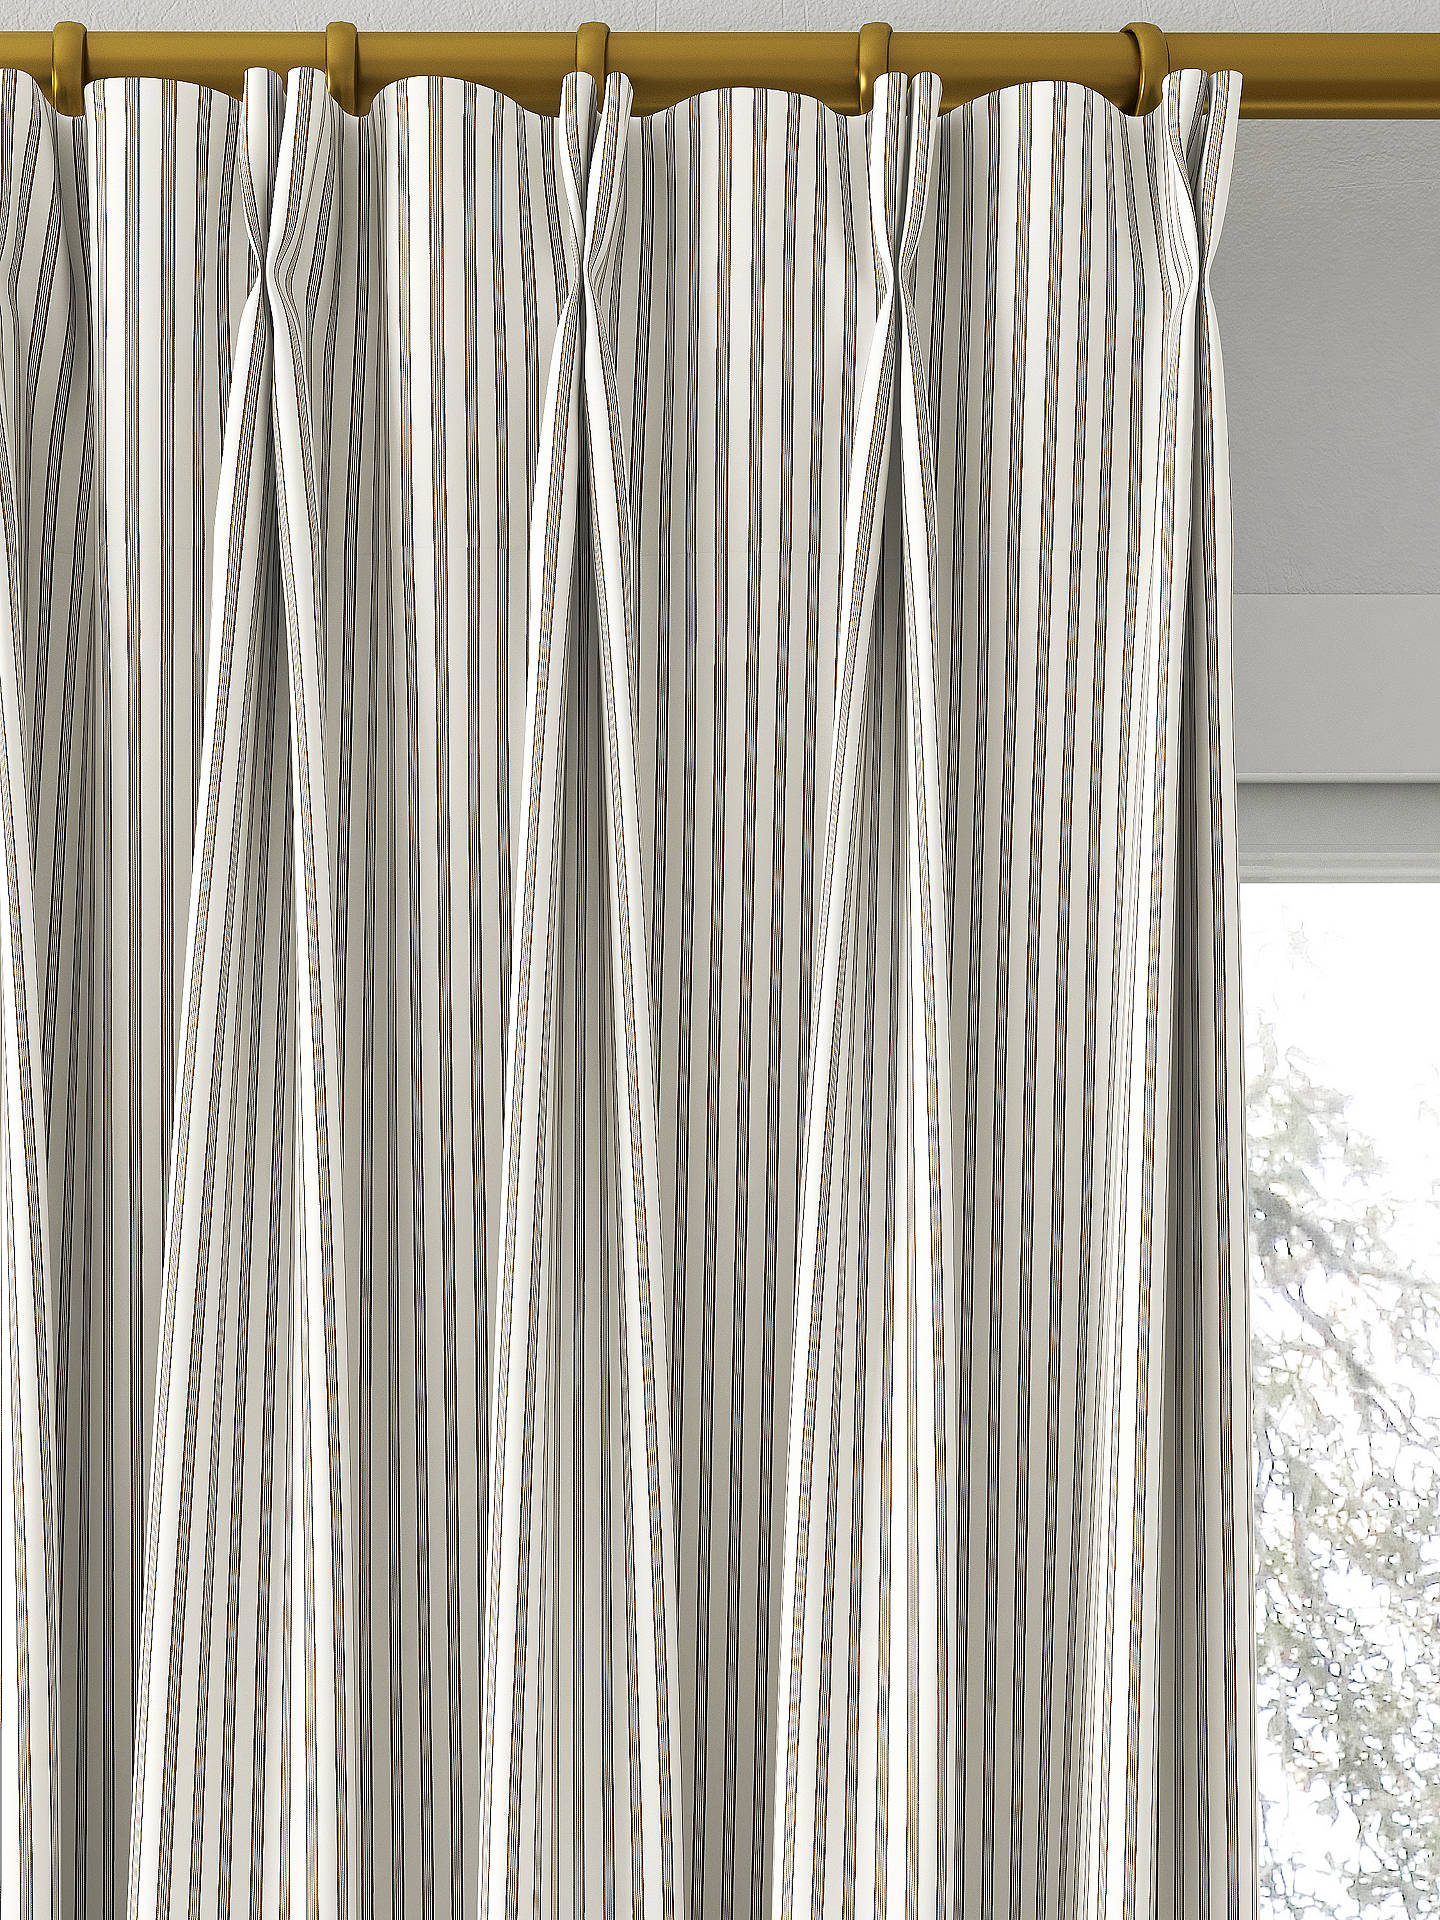 Clarke & Clarke Edison Made to Measure Curtains, Charcoal/Natural